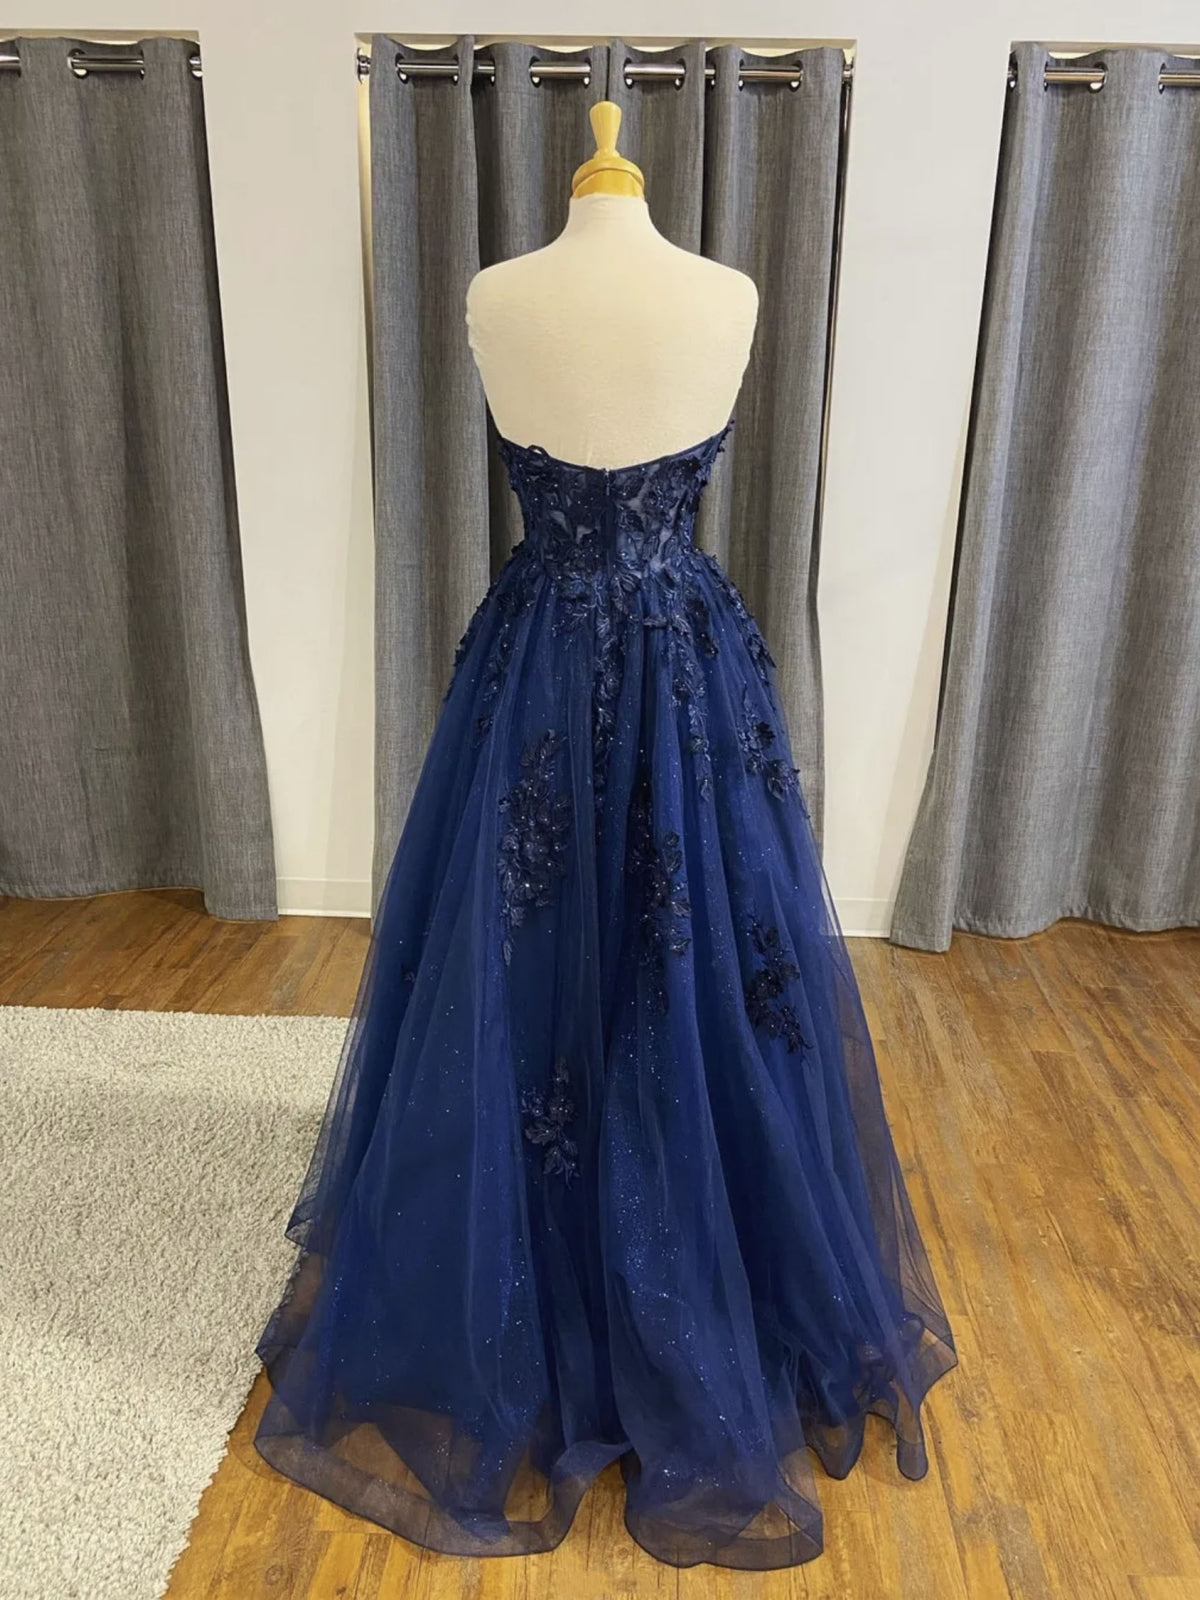 Strapless Open Back Navy Blue Lace Beaded Long Prom Dresses, Navy Blue Lace Formal Graduation Evening Dresses 